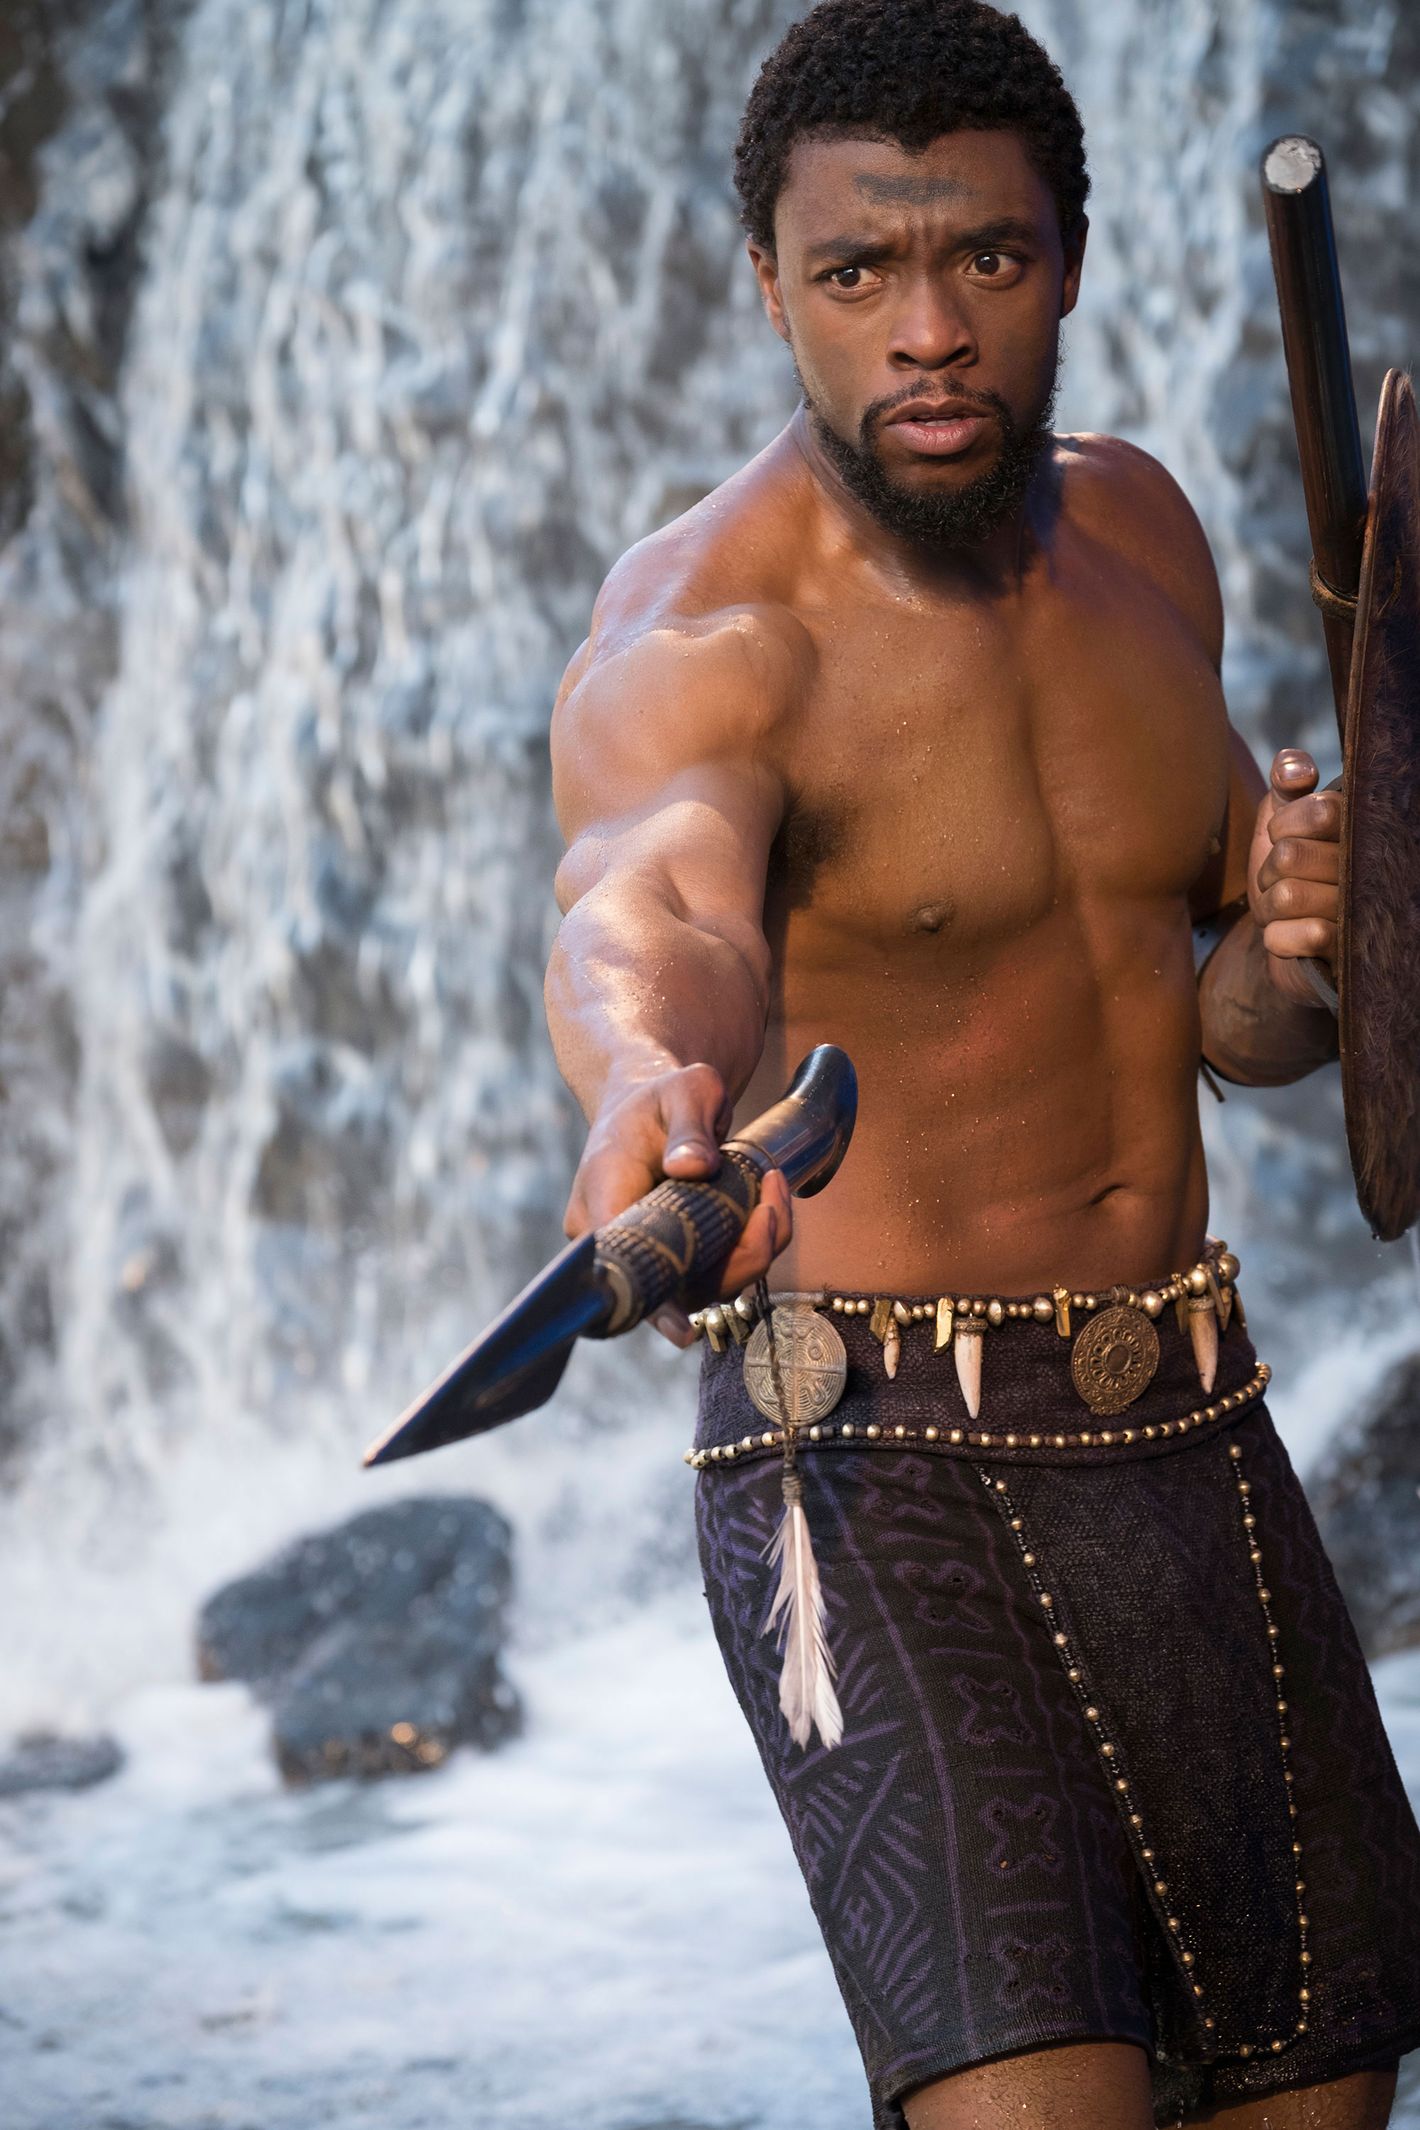 The 'Black Panther' Cast Is Incredibly Hot